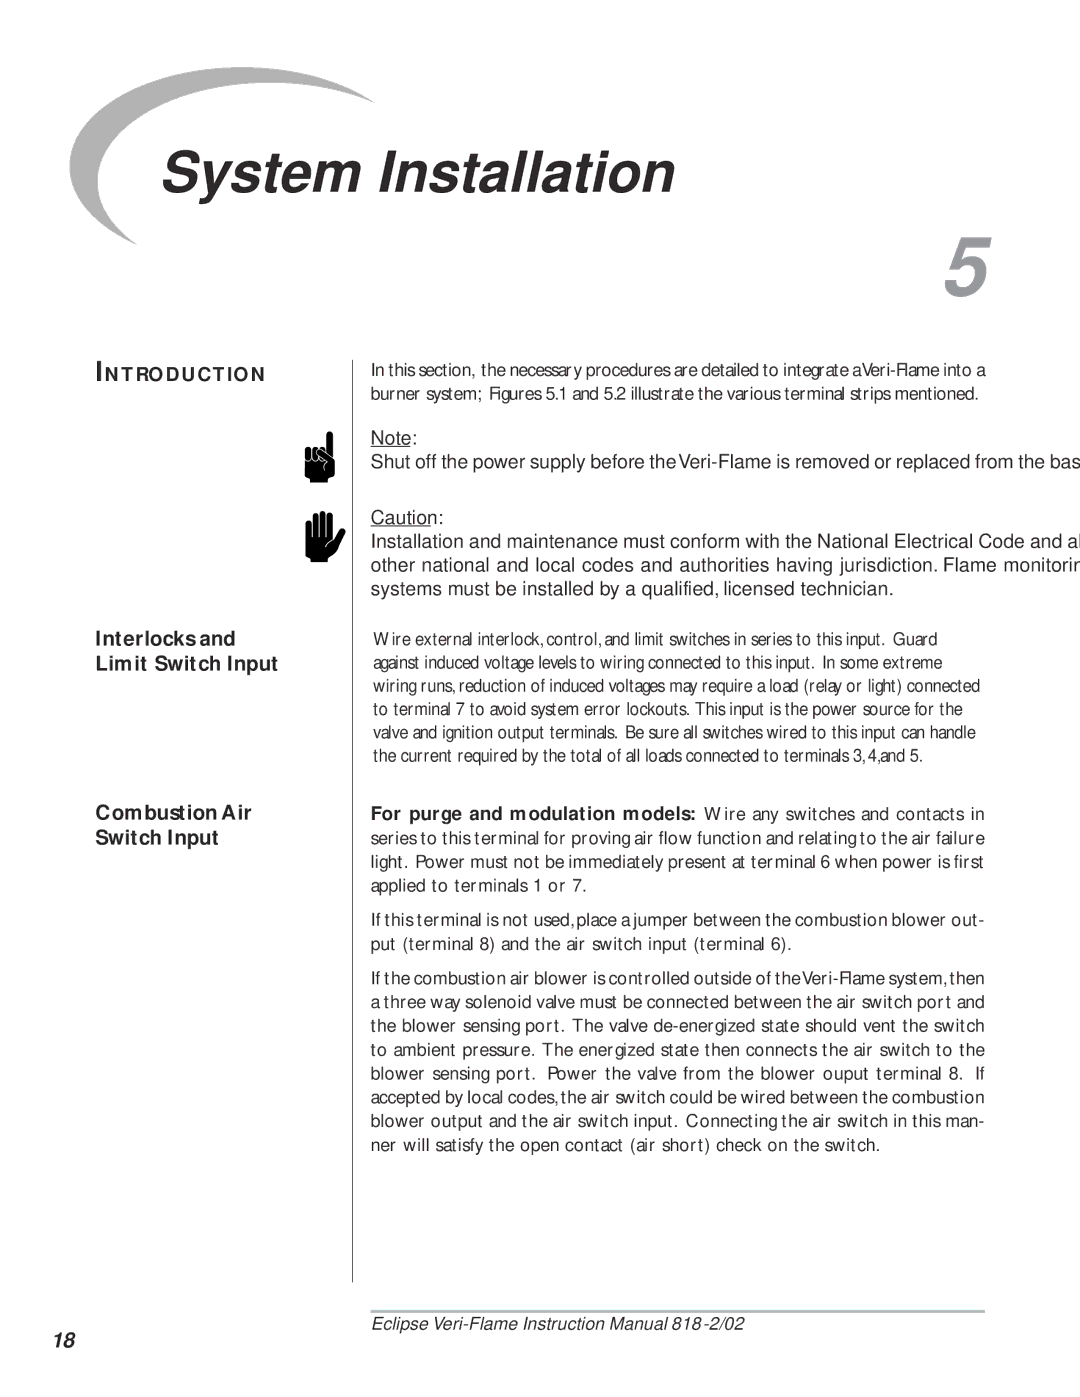 Eclipse Combustion 5600, VeriFlame Single Burner Monitoring System instruction manual System Installation, Introduction 